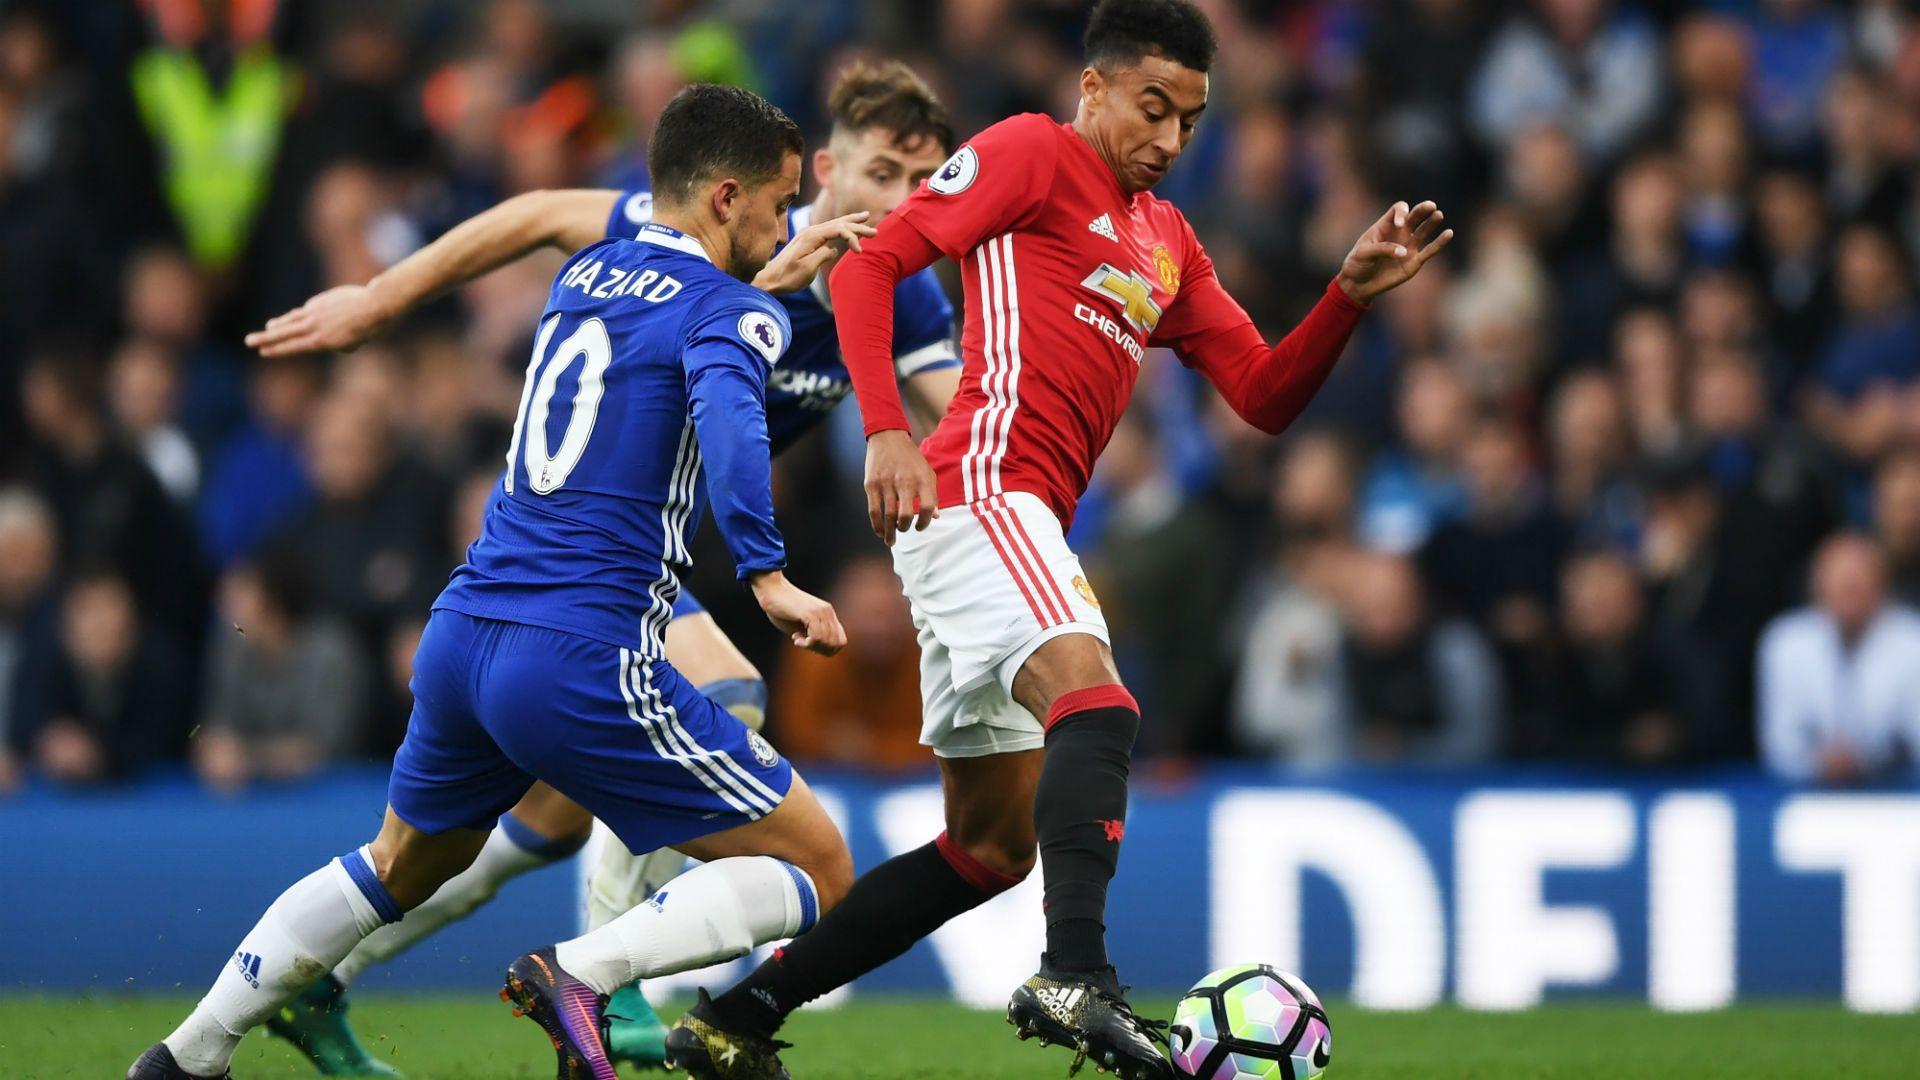 Chelsea v Manchester United News and Predicted Line Ups